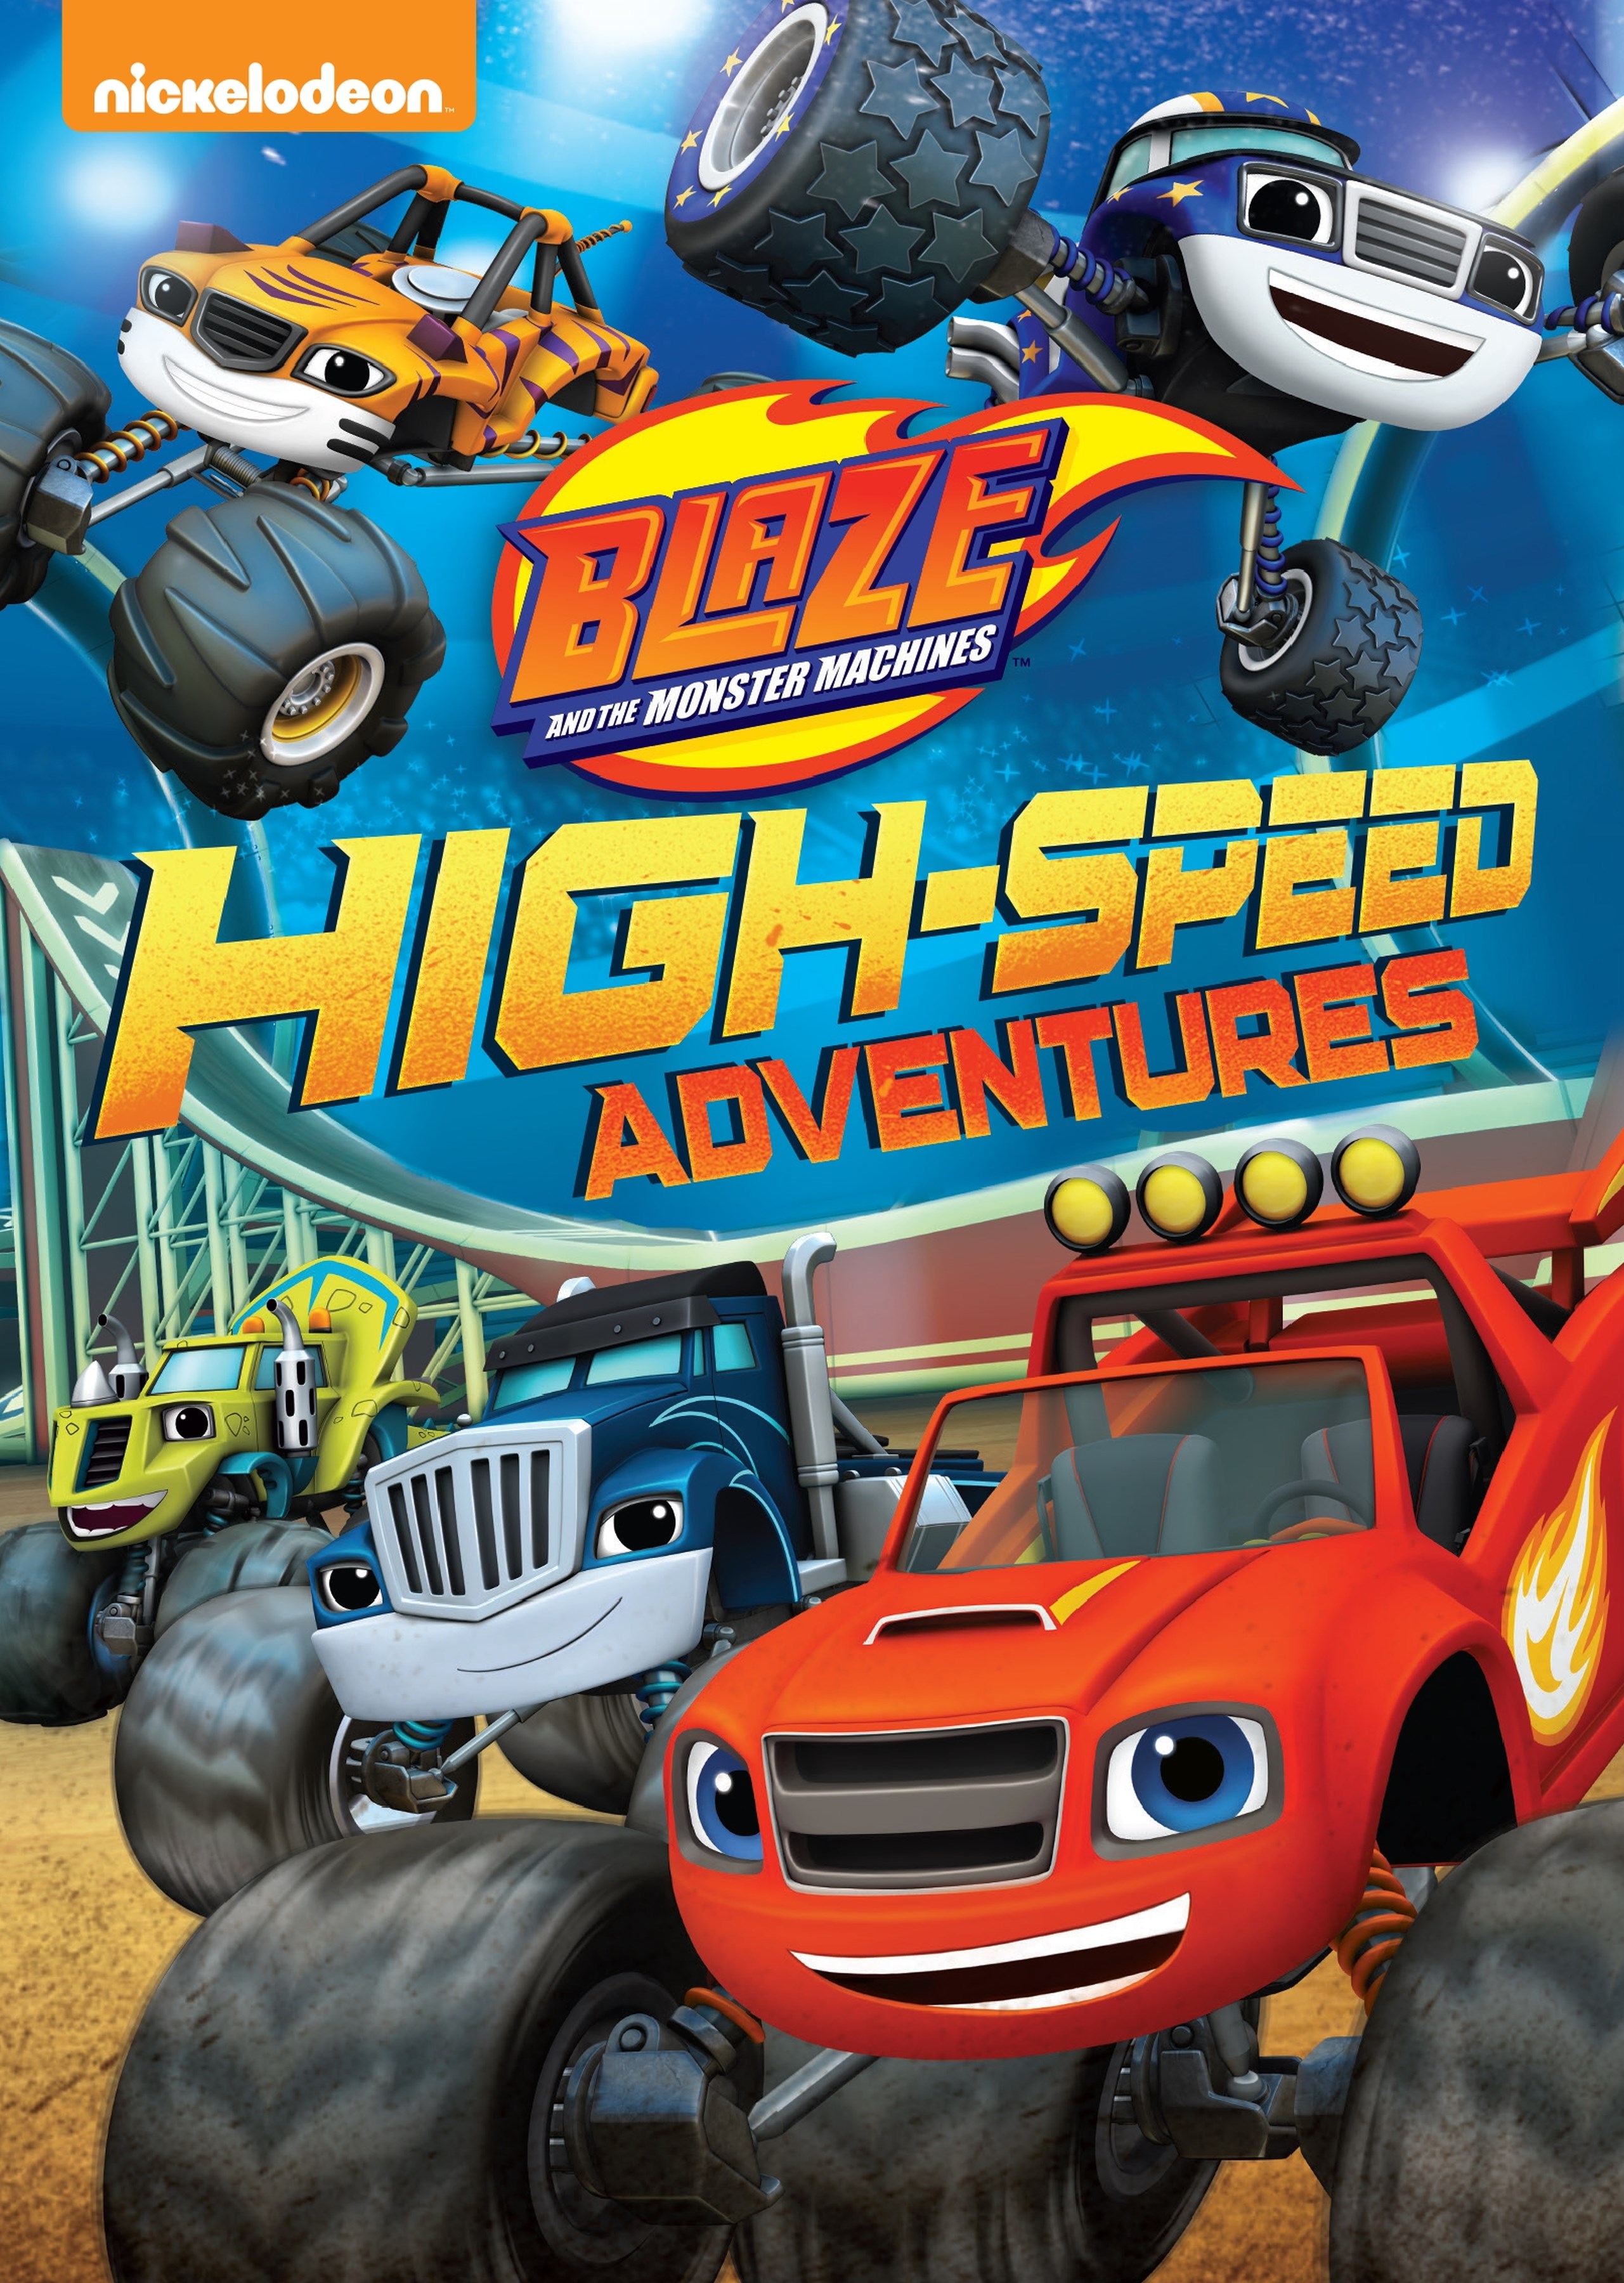 Blaze and the Monster Machines: Big Rig to the Rescue! - Best Buy